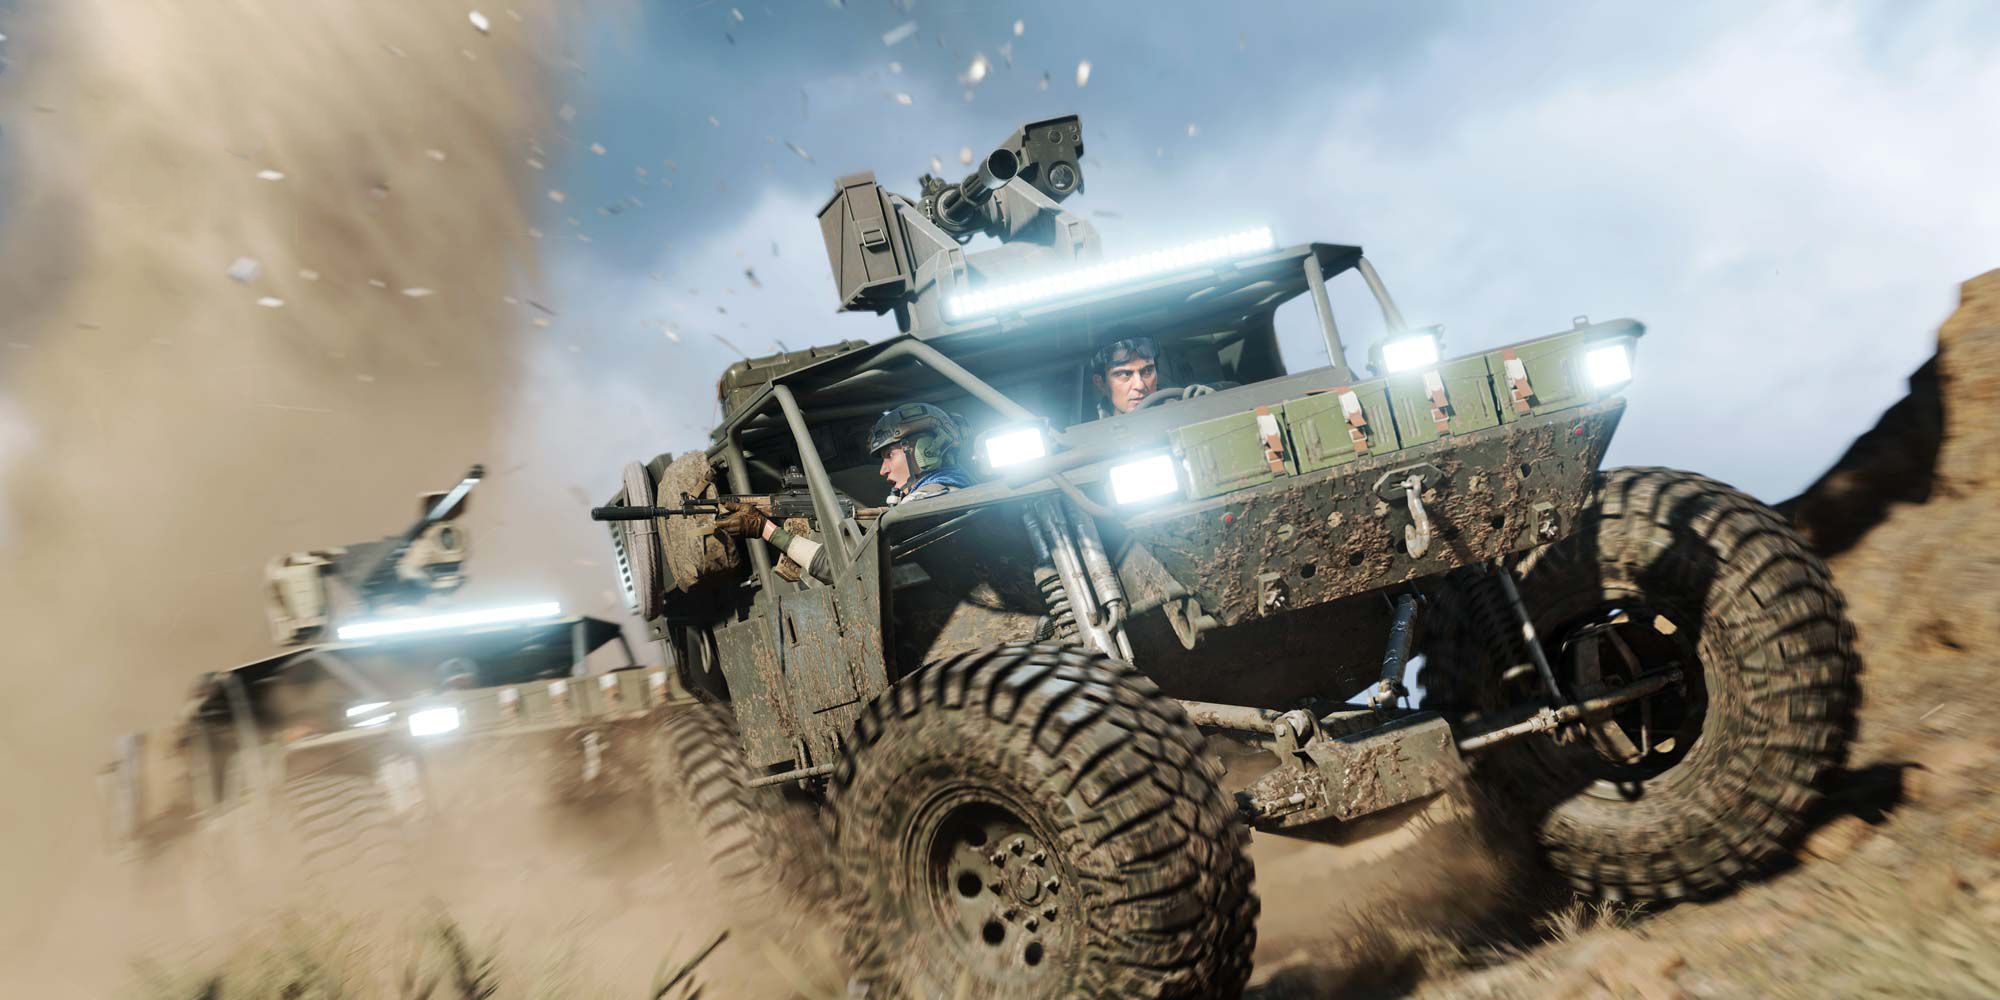 Battlefield 2042 army trucks driving in single file in the dirt. Both have guns mounted on the roof